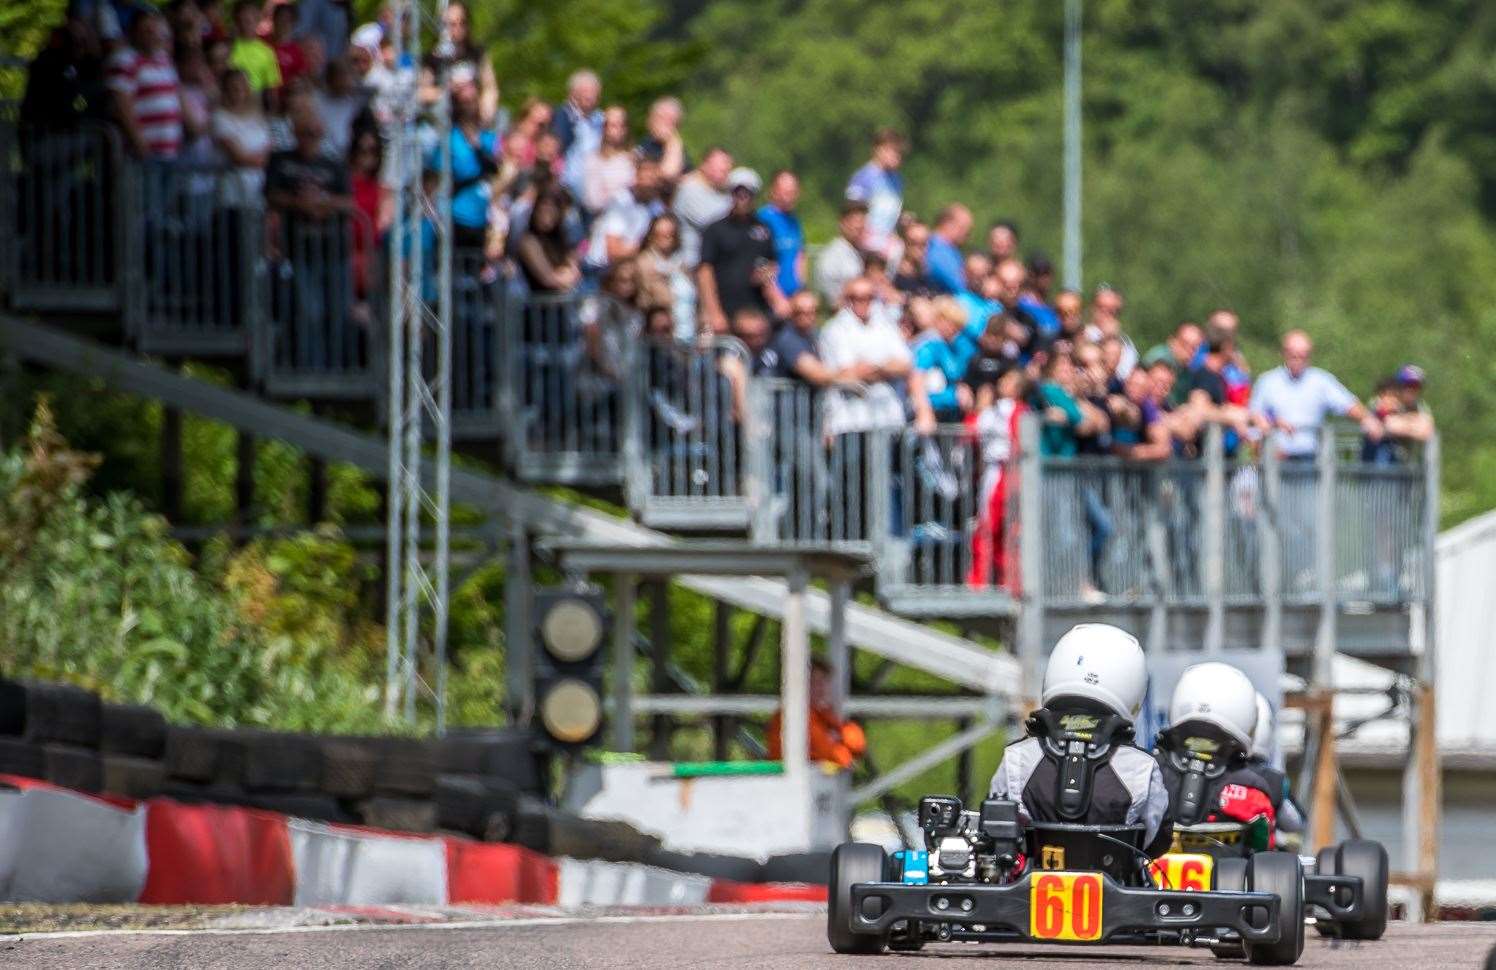 A new grandstand was installed as part of a £150,000 upgrade before Super One karting returned in May 2014. Sisley says he may have introduced glamping or an assault course to the neighbouring woods if he was still in charge of the circuit. Picture: Paul Babington